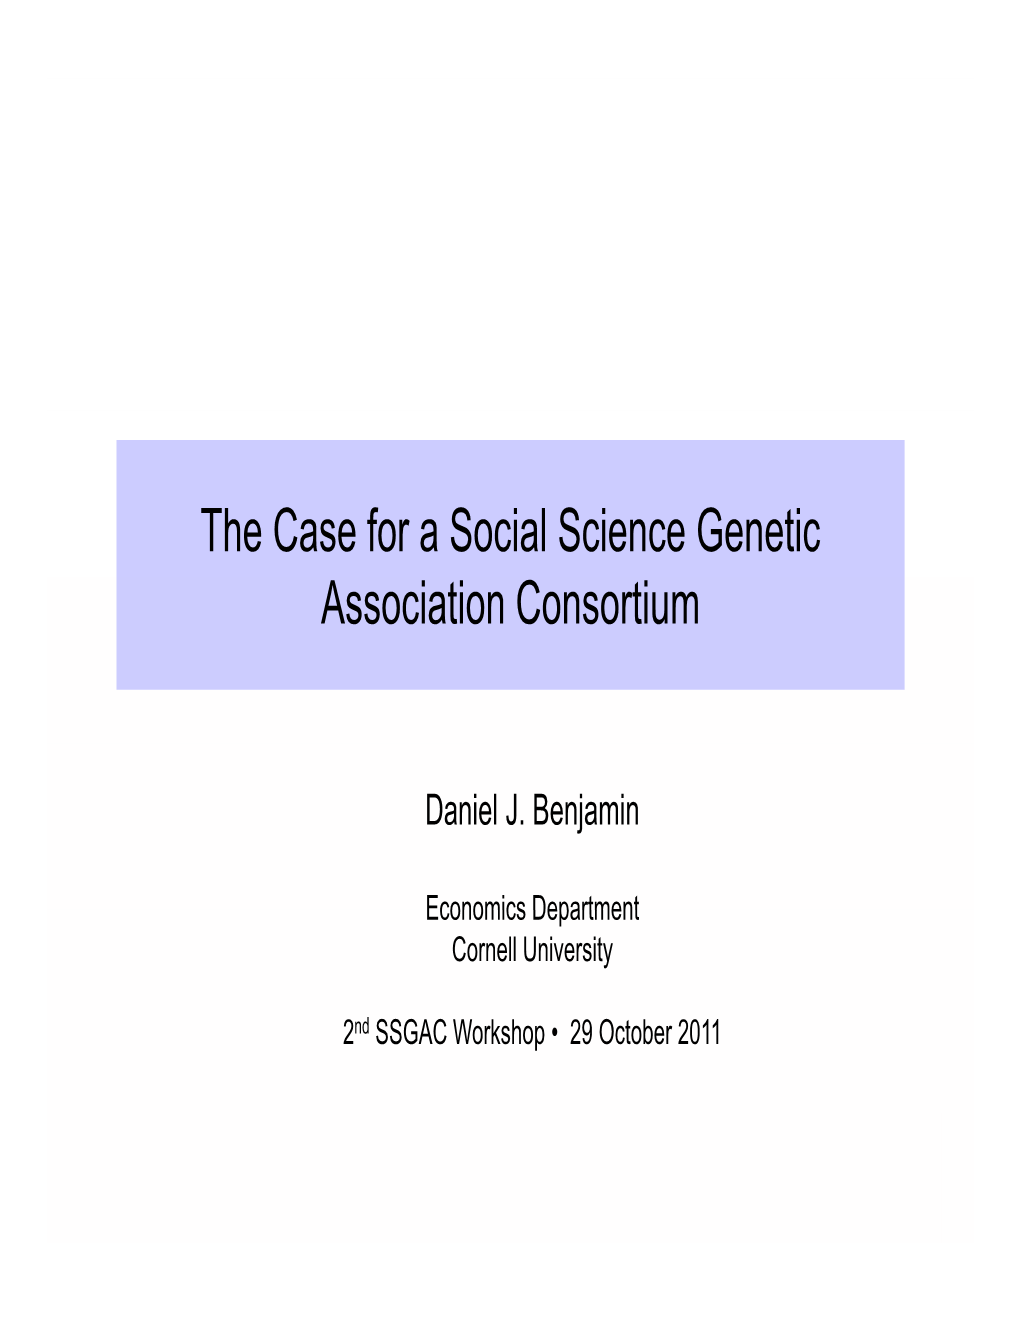 The Case for a Social Science Genetic Association Consortium